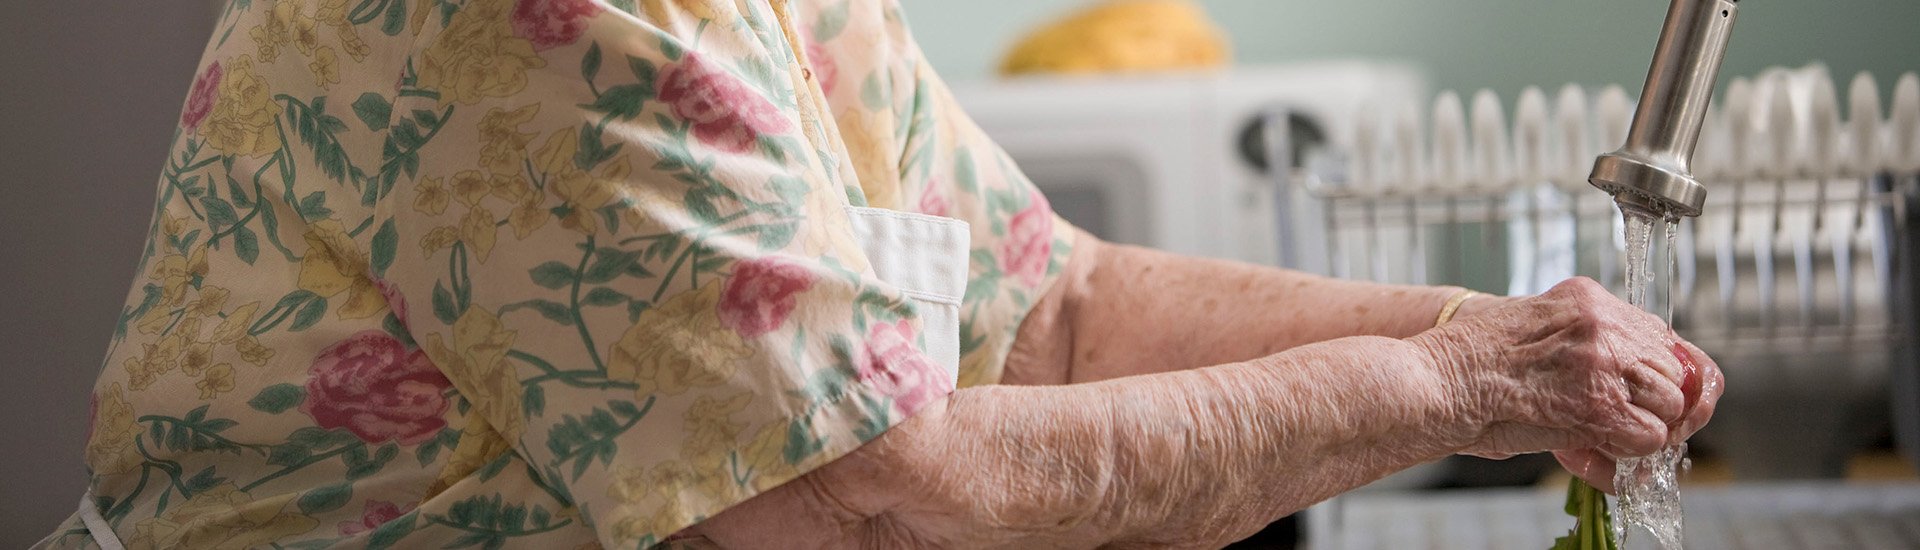 older-person-washing-hands